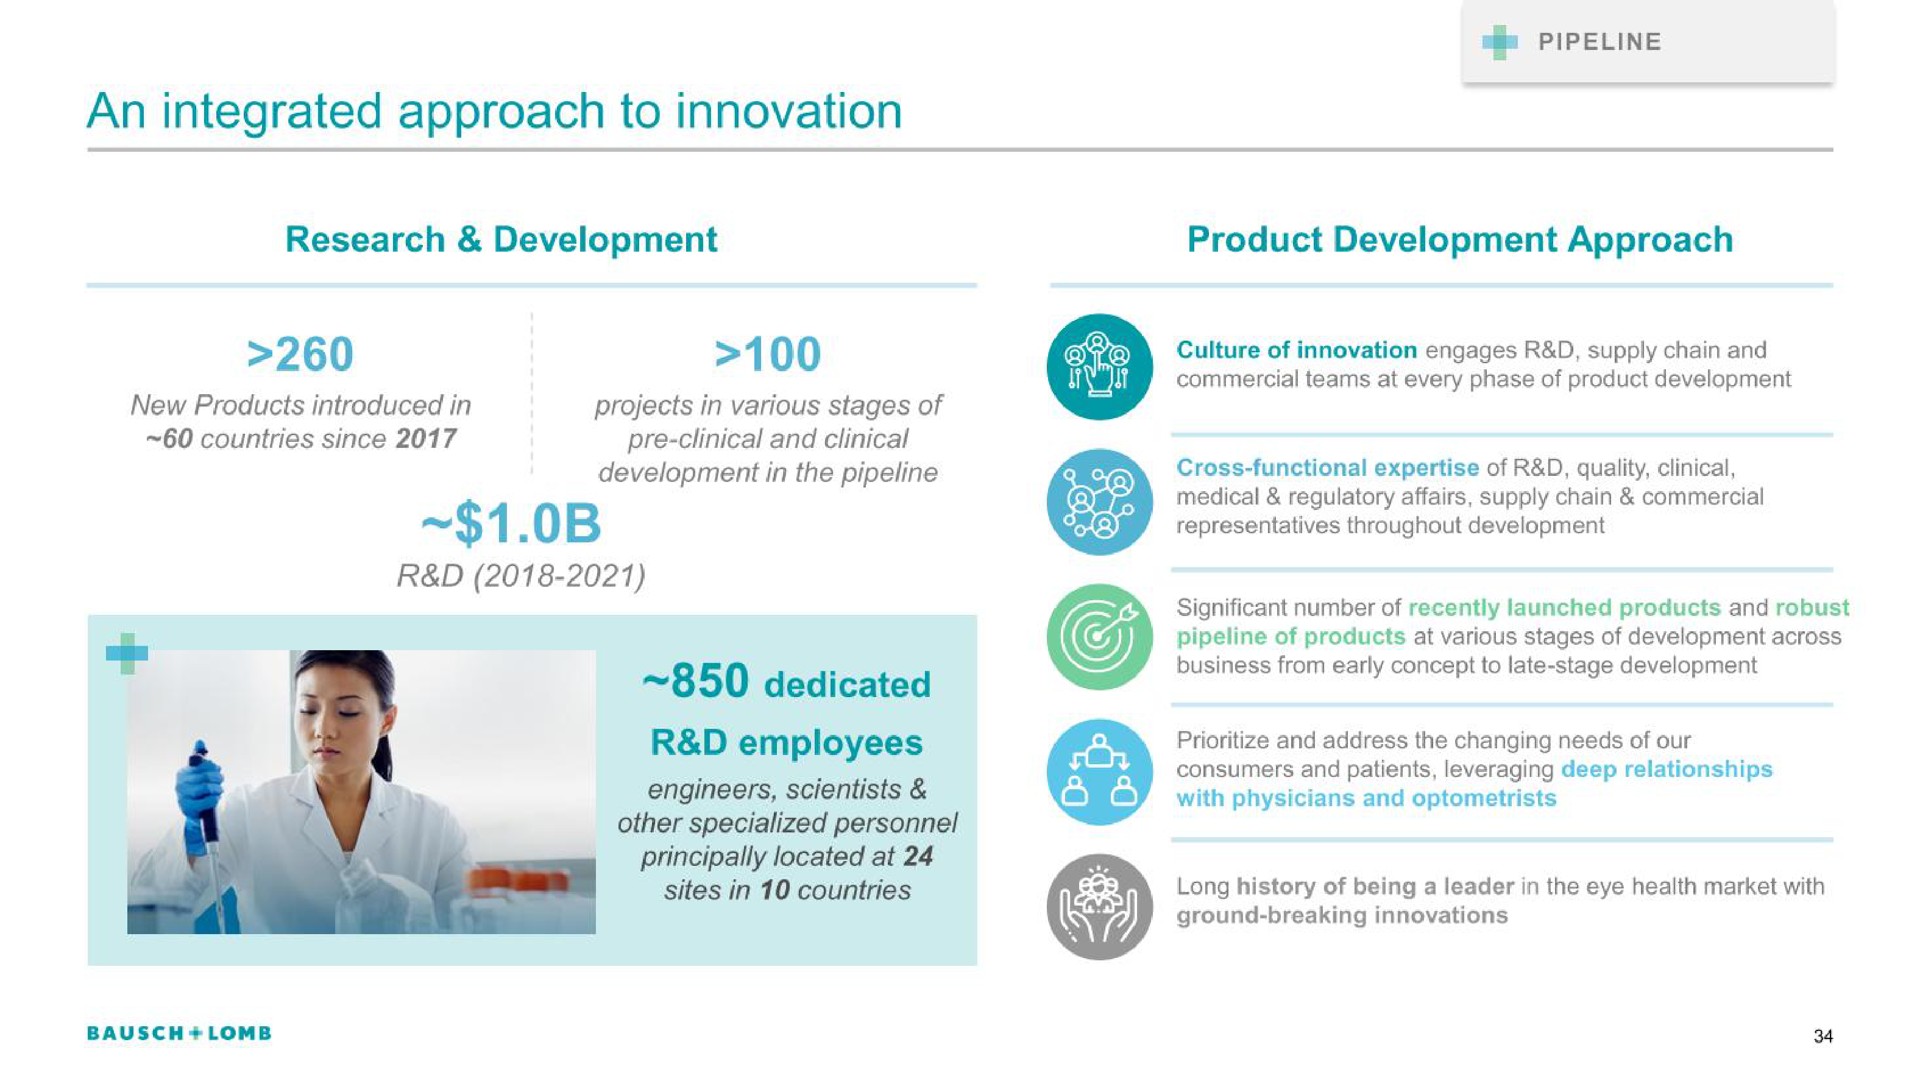 an integrated approach to innovation dedicated | Bausch+Lomb